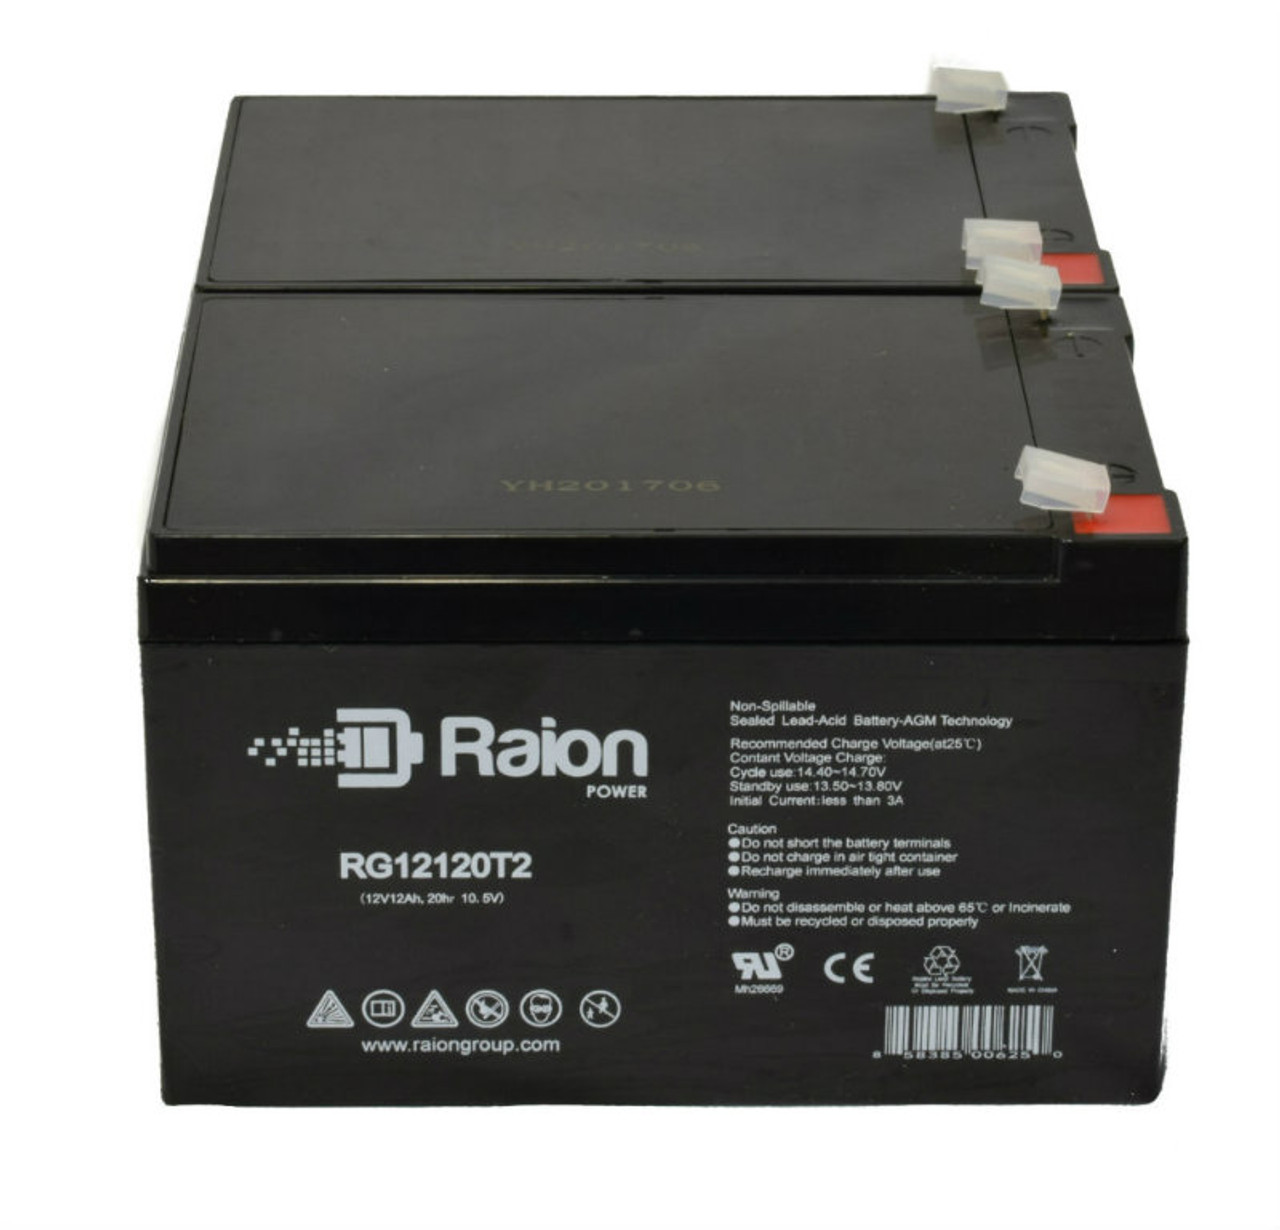 Raion Power 12V 12Ah Non-Spillable Compatible Replacement Battery for Flying Power NOS12-12B - (2 Pack)